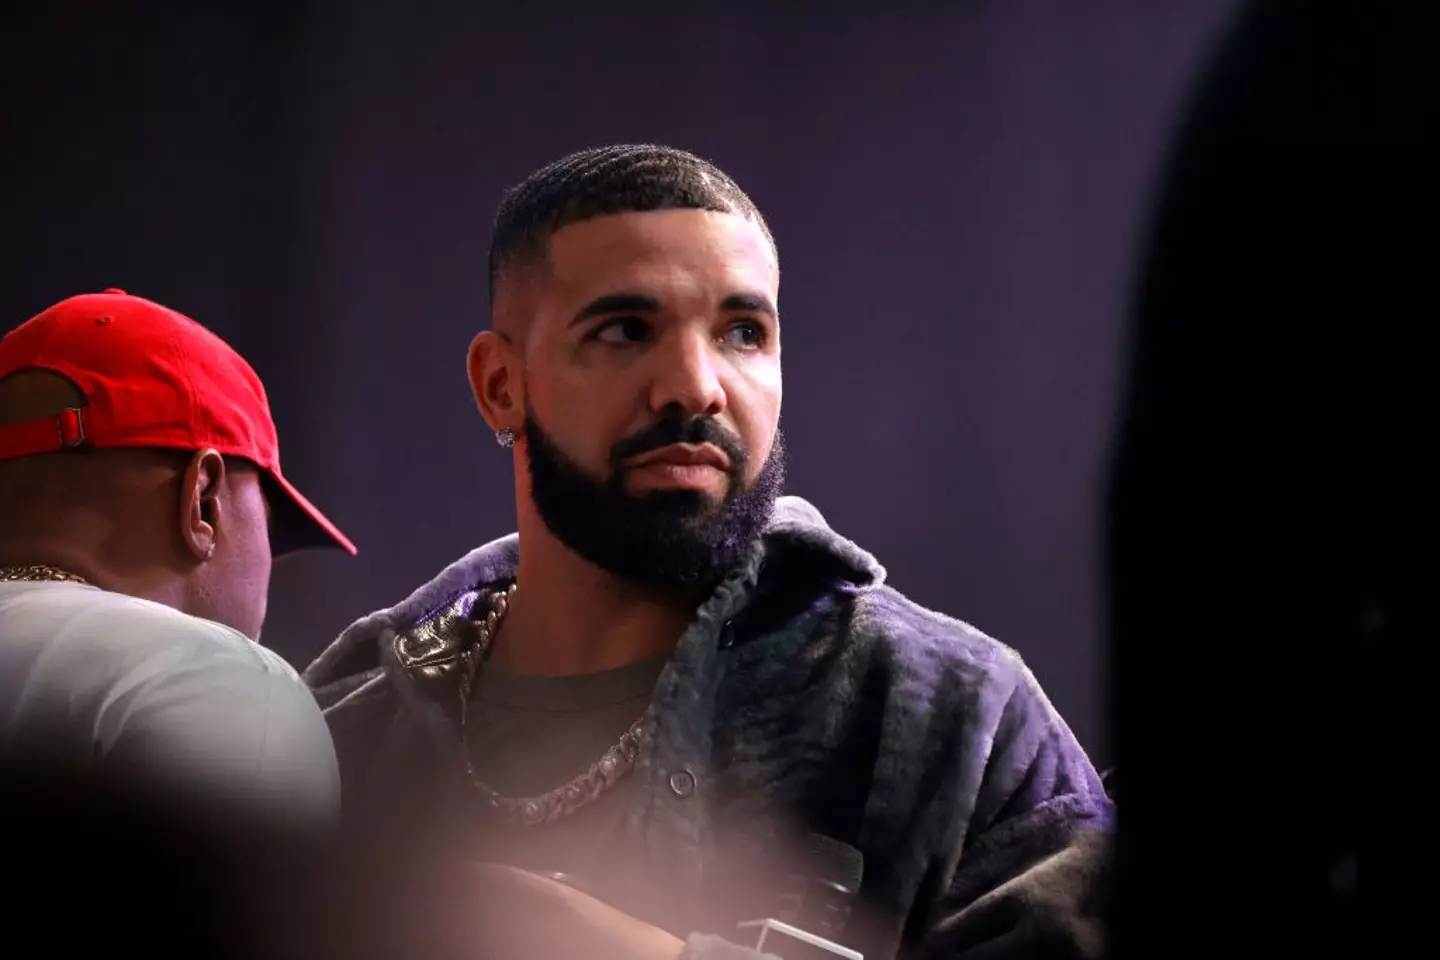 Drake has been embroiled in controversy as of late with fellow rapper Kendrick Lamar. (Getty Images)